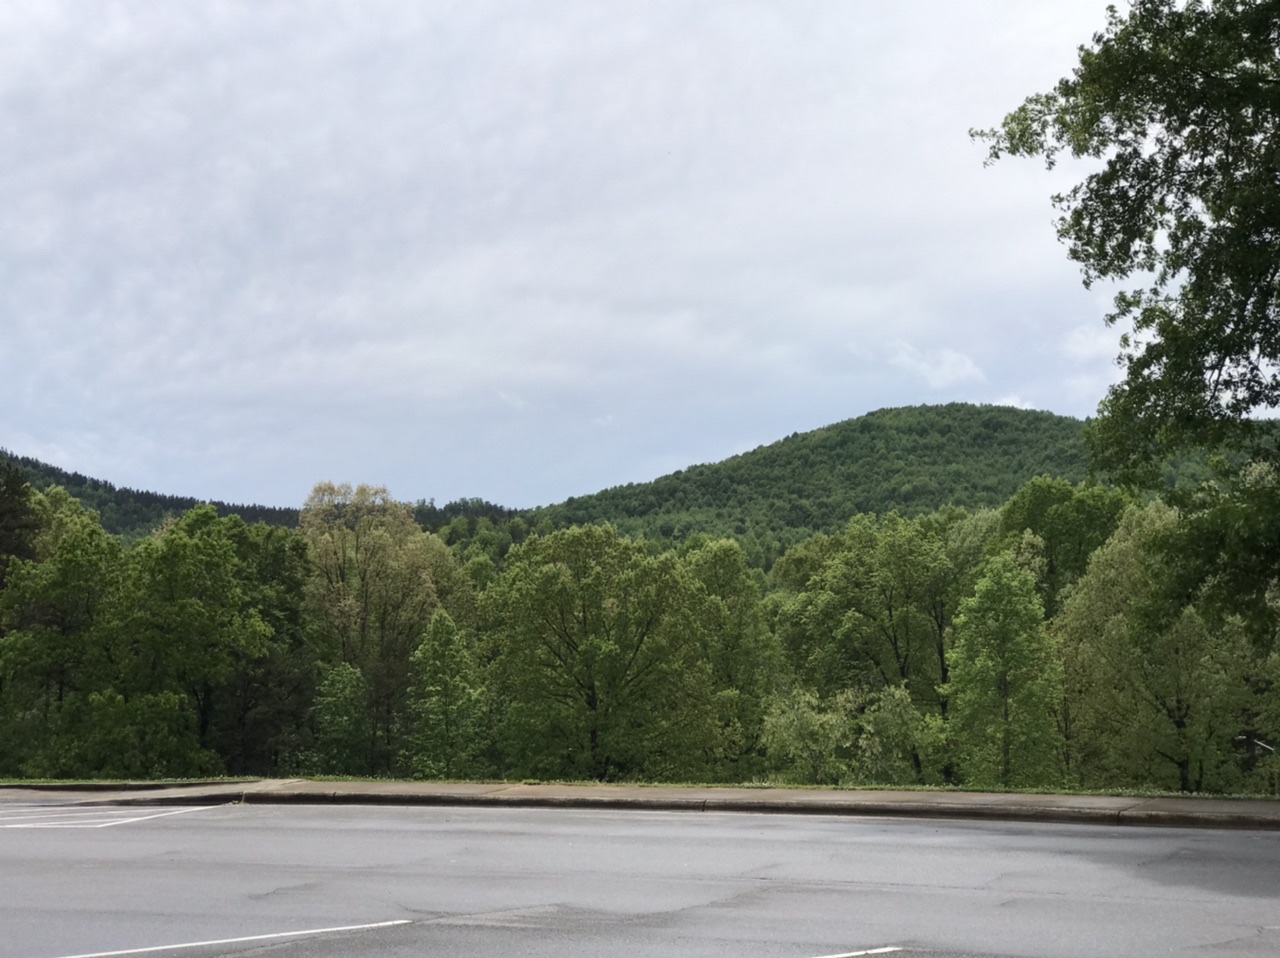 Scenery at a North Carolina rest area.  Photo taken by and the property of FourWalls.